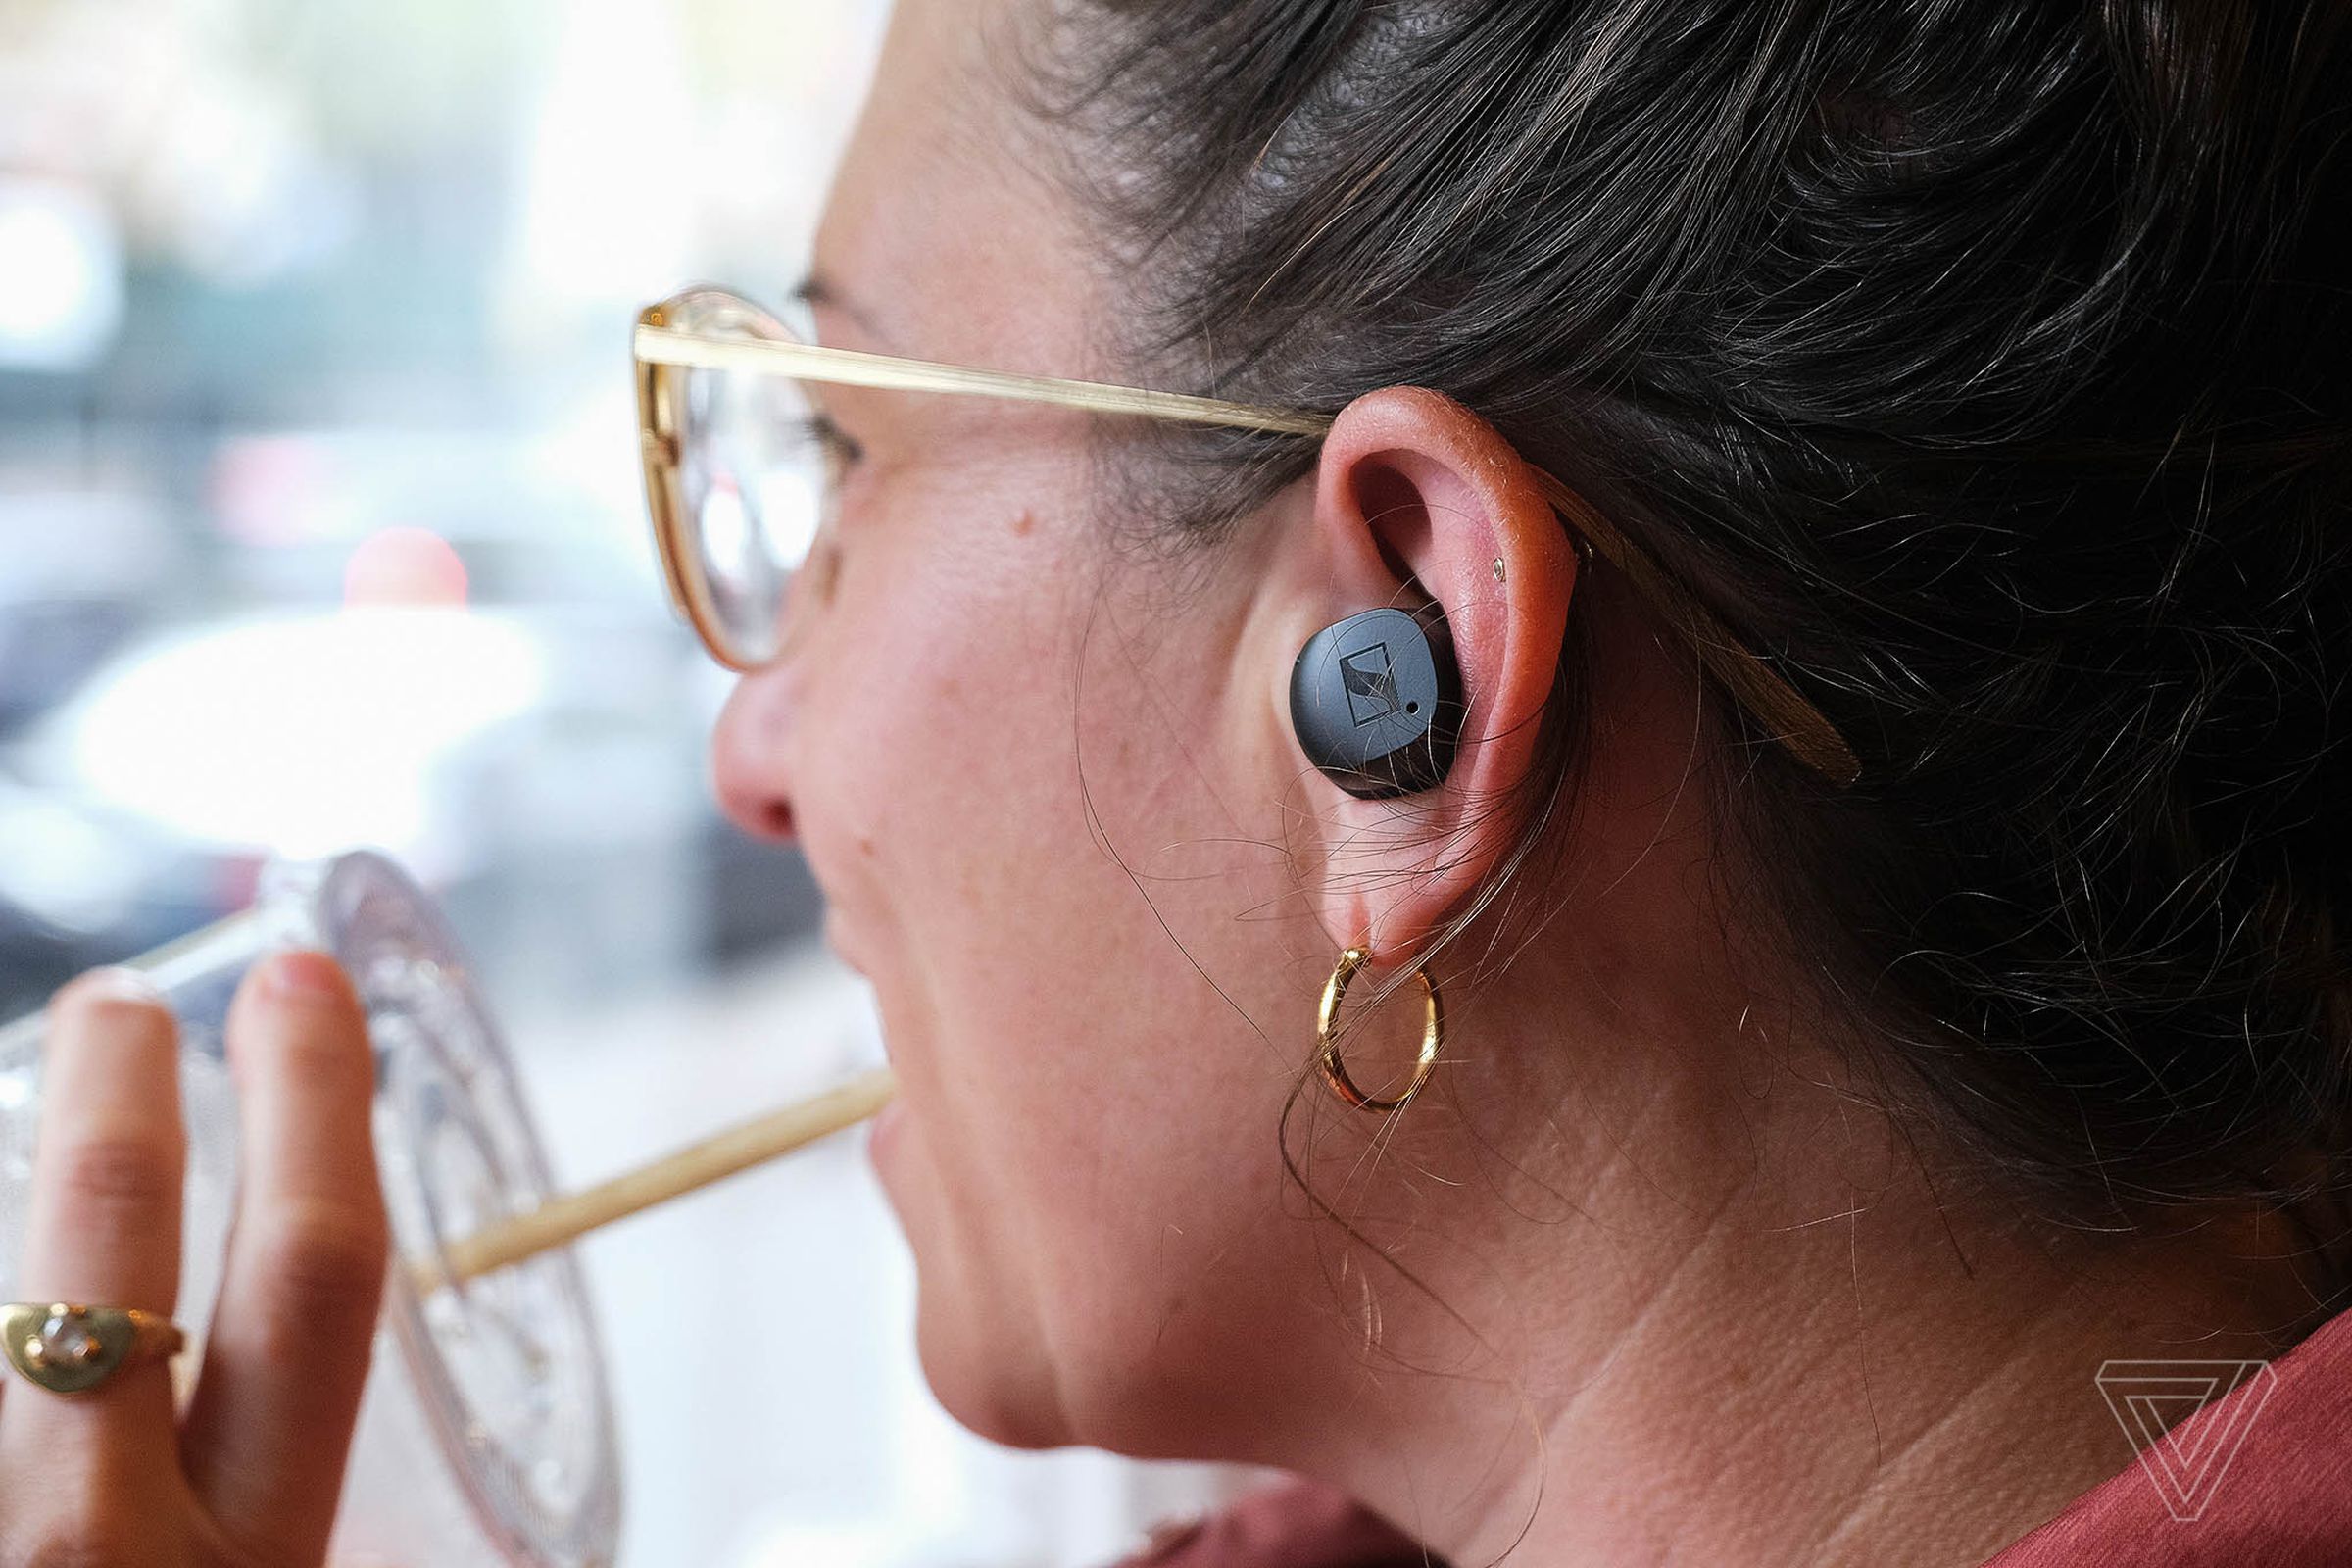 The more compact Momentum True Wireless 3s might be a better fit for people with smaller ears.